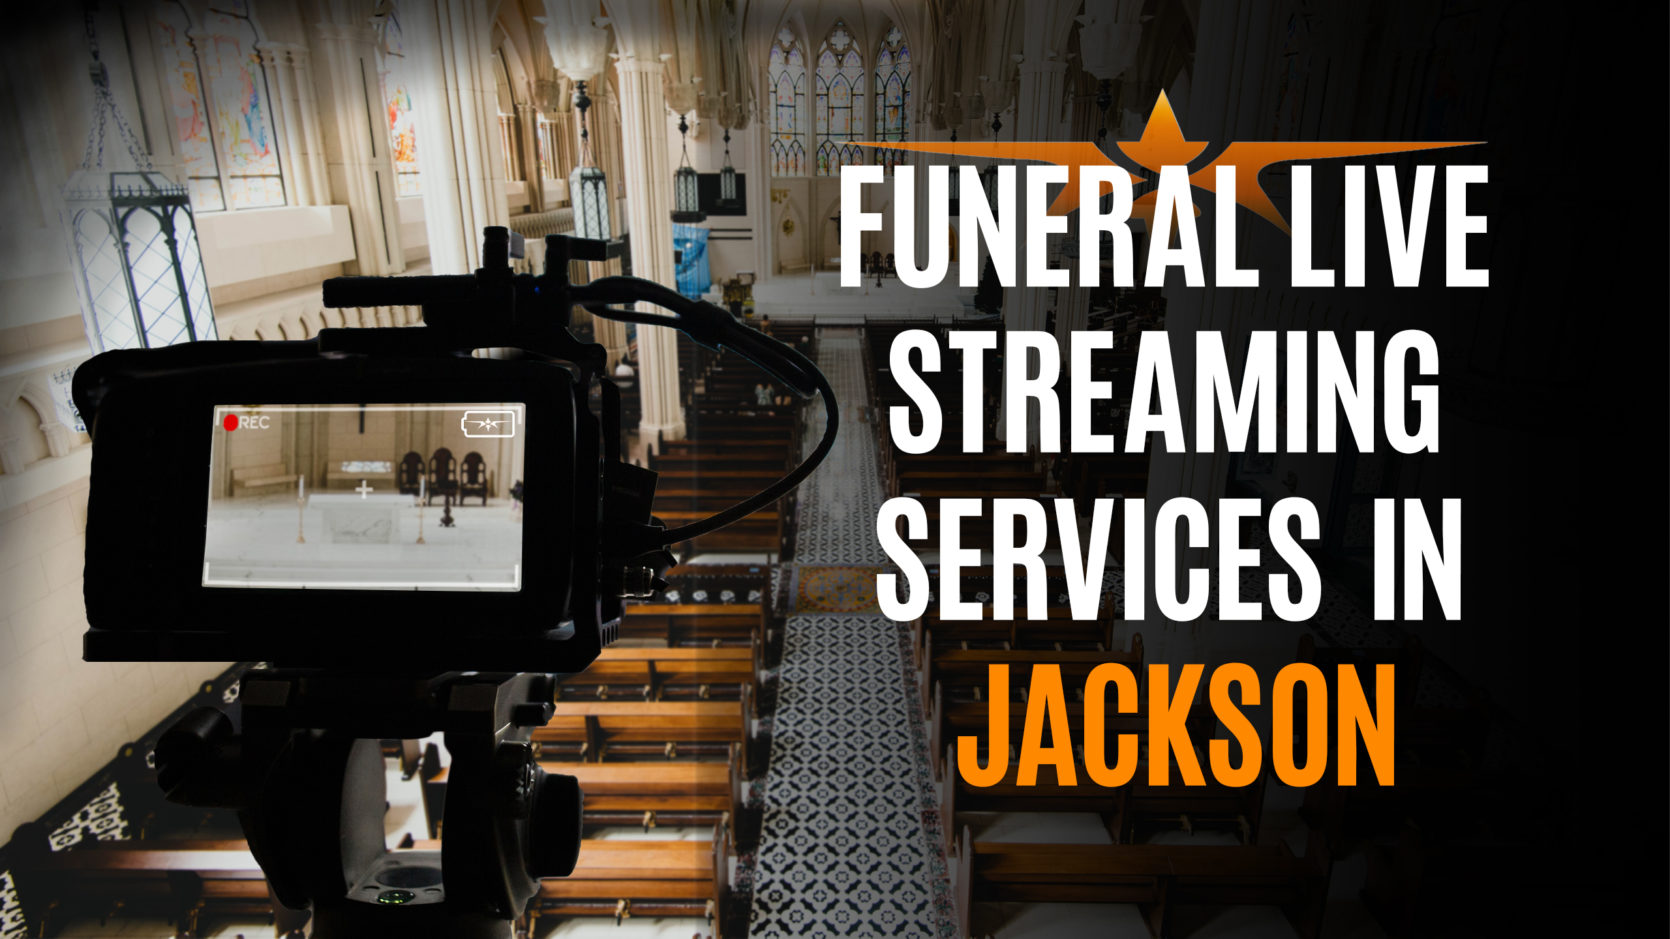 Funeral Live Streaming Services in Jackson